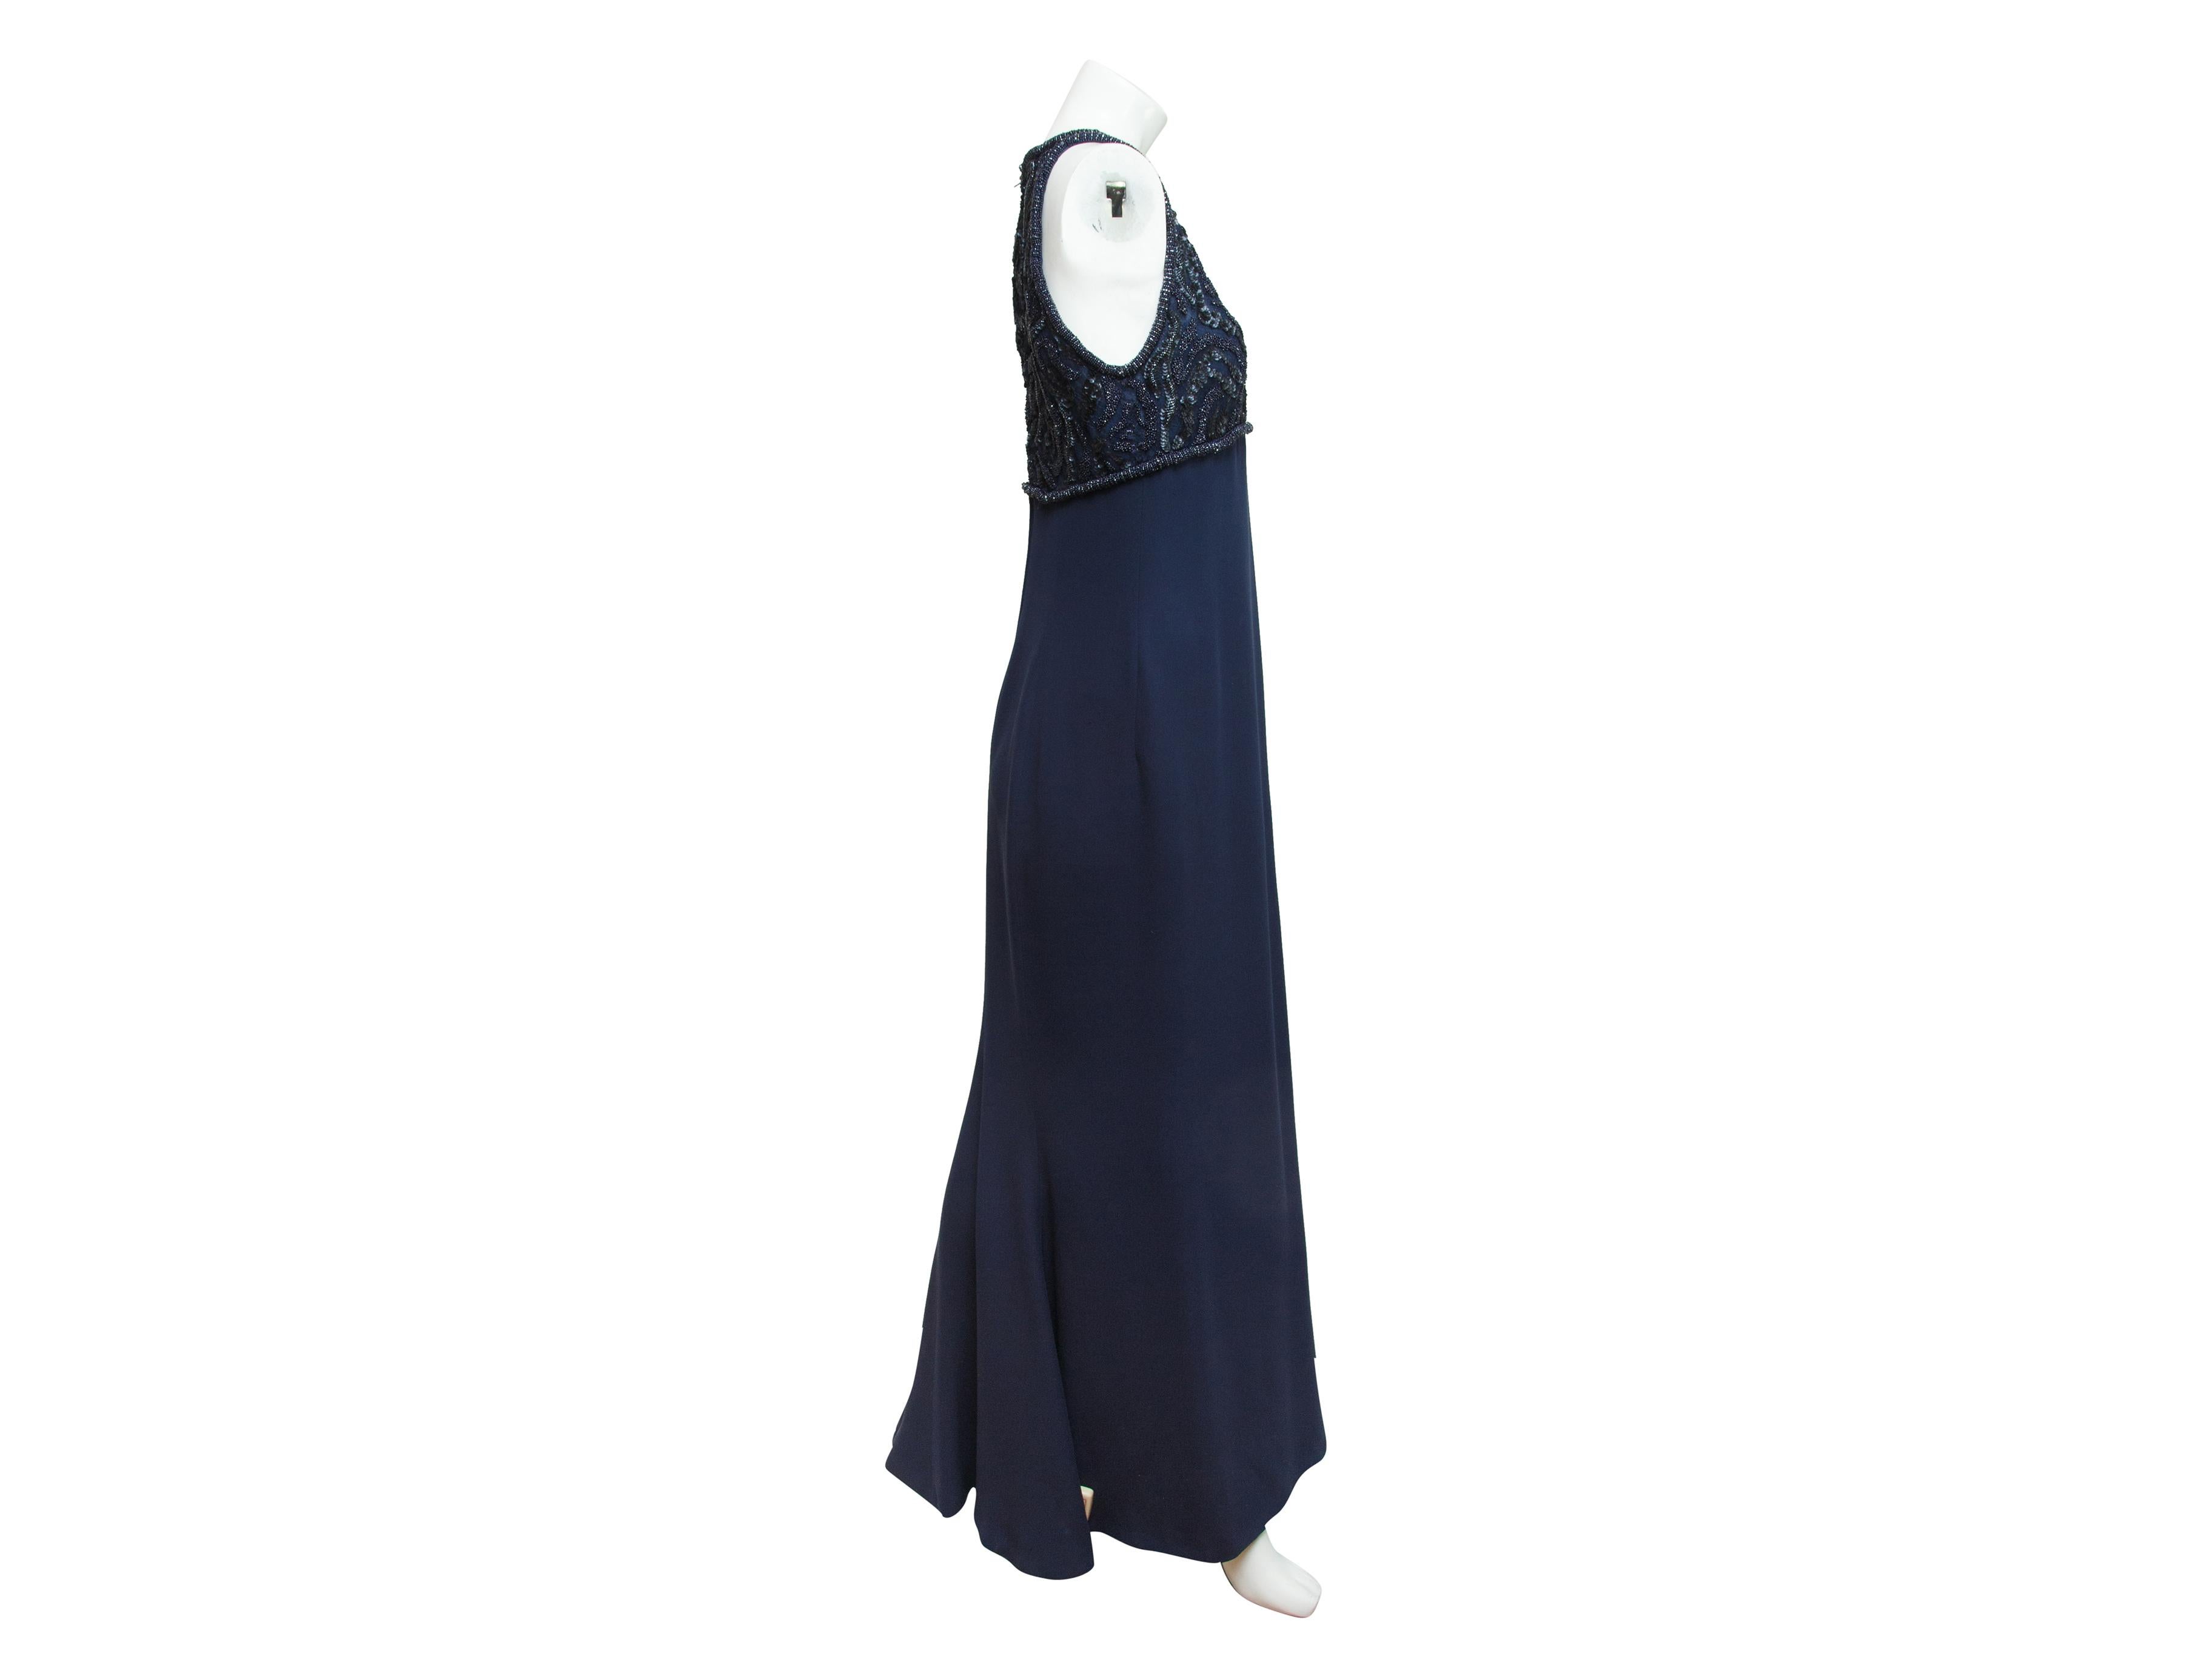 Product details:  Navy blue embellished gown by Giorgio Armani.  Roundneck.  Sleeveless.  Beaded bodice.  Concealed back zip closure.  32